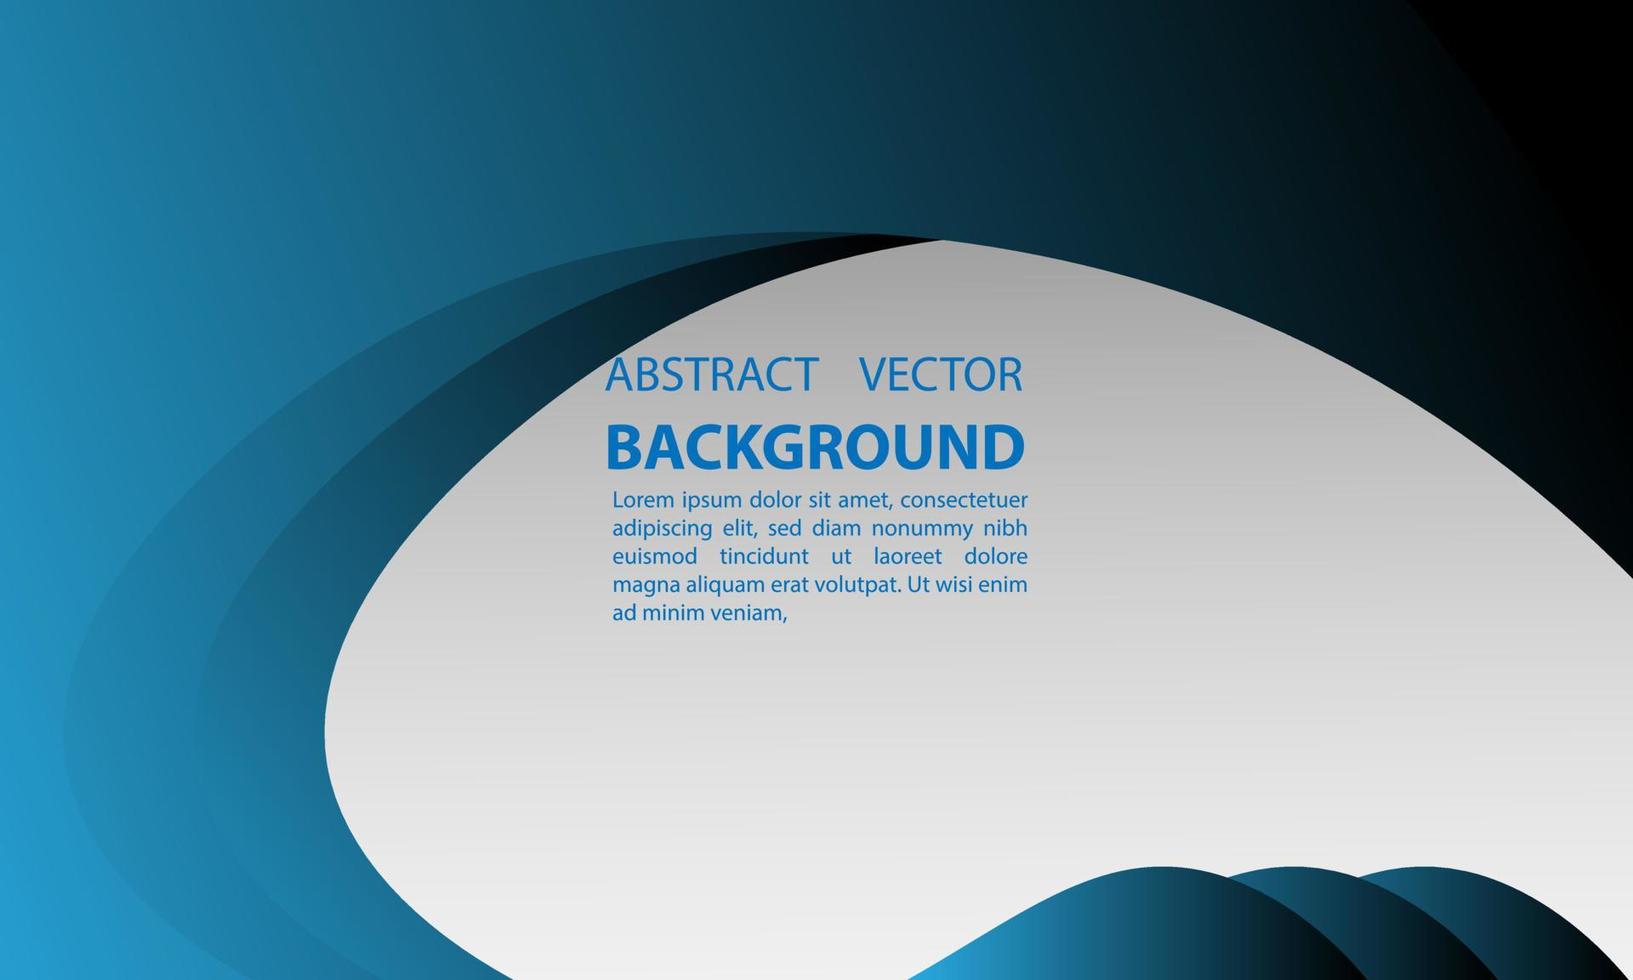 background abtrak gradient geometric liquid wave form abstract lines of colorful blue vectors, for posters, banners, and others, vector design illustration eps 10